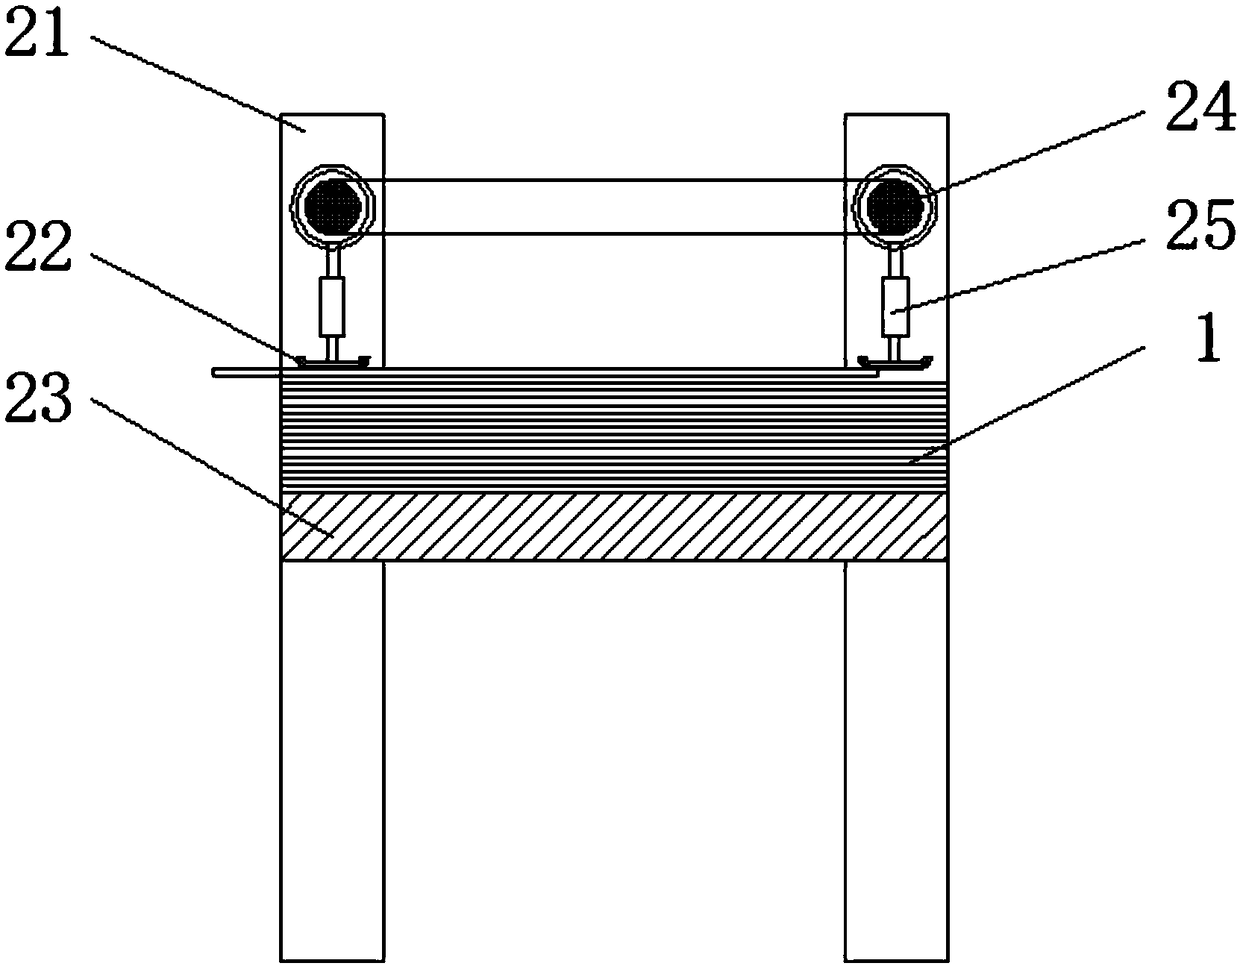 Integrated screen printing device for tinplates and screen printing technology